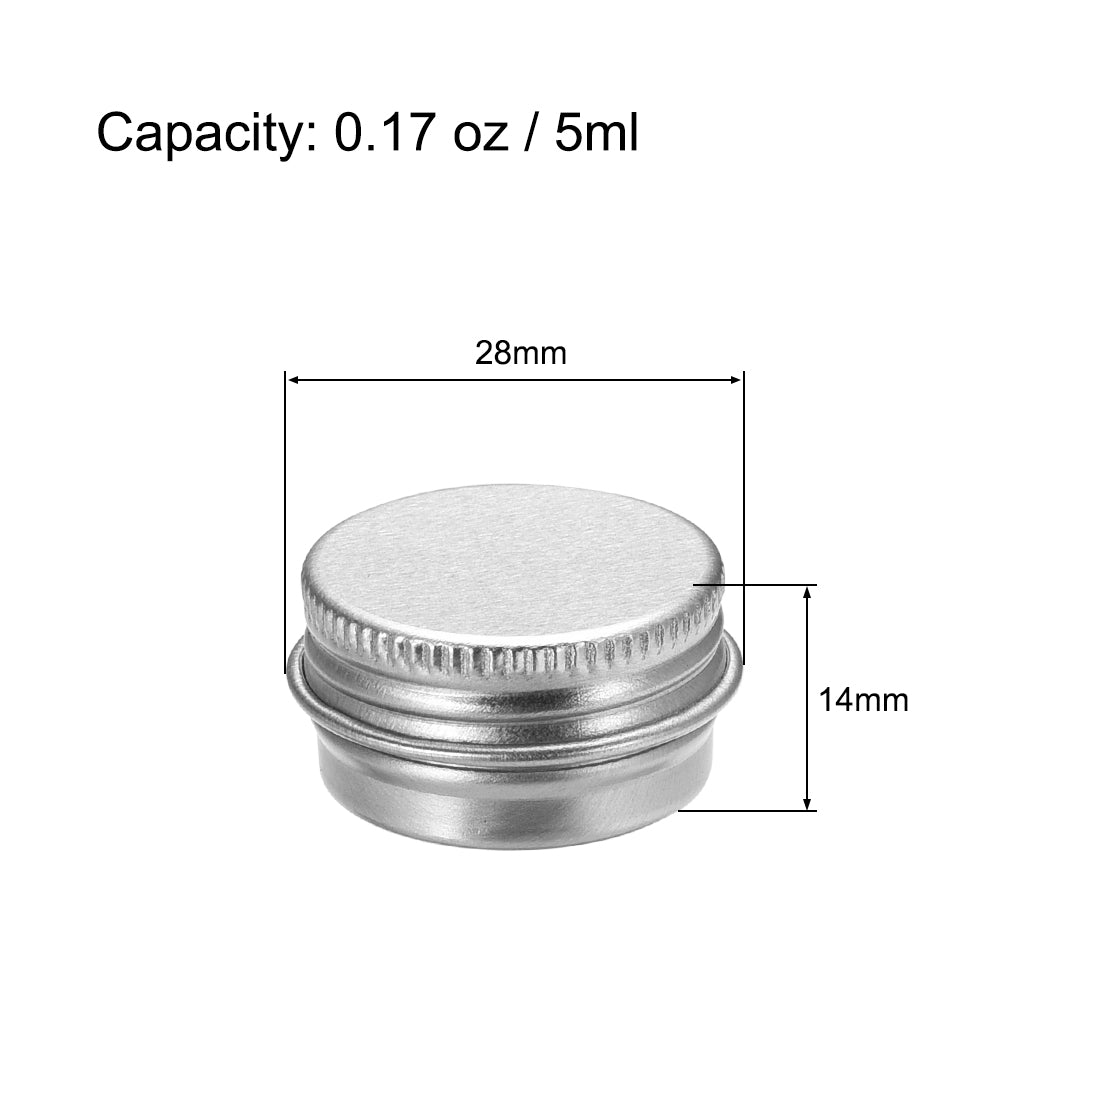 uxcell Uxcell 0.17 oz Round Aluminum Cans Tin Can Screw Top Metal Lid Containers 5ml, 6pcs